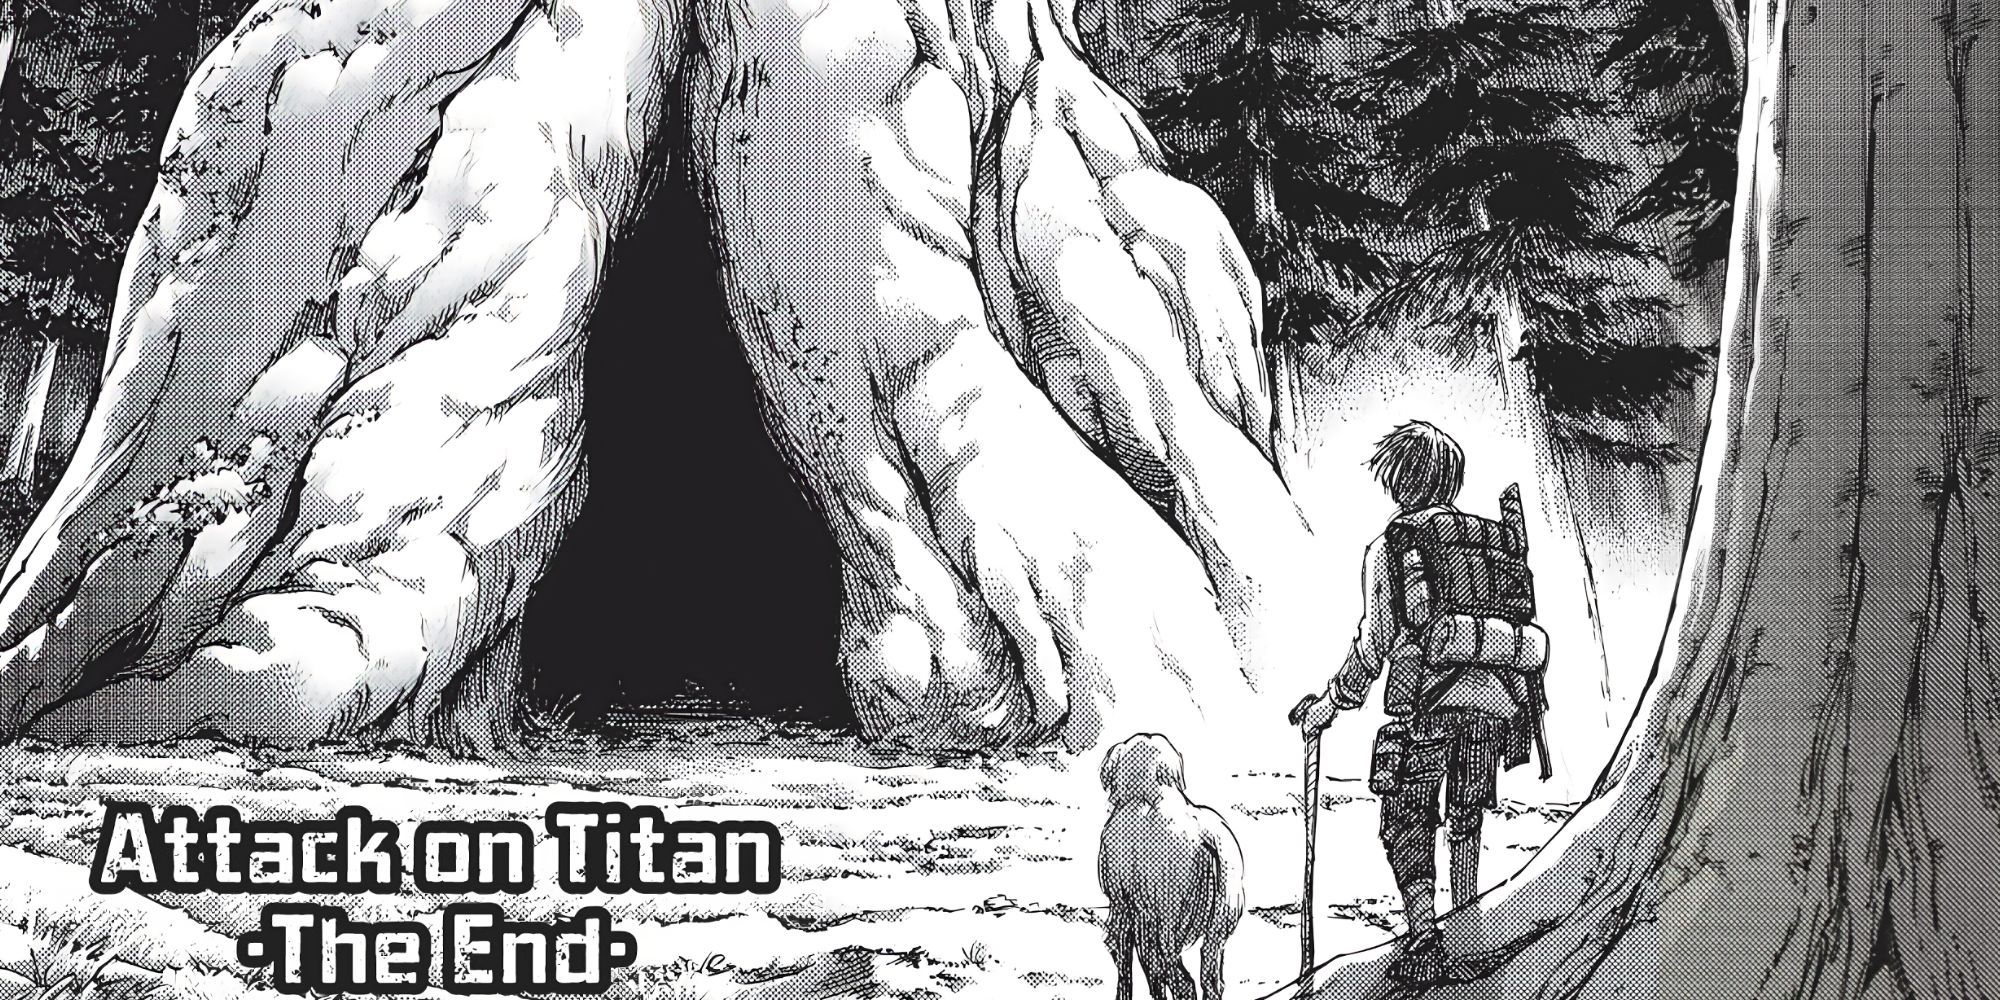 Attack On Titan chapter 139 epilogue featuring a boy entering a giant tree in Paradis